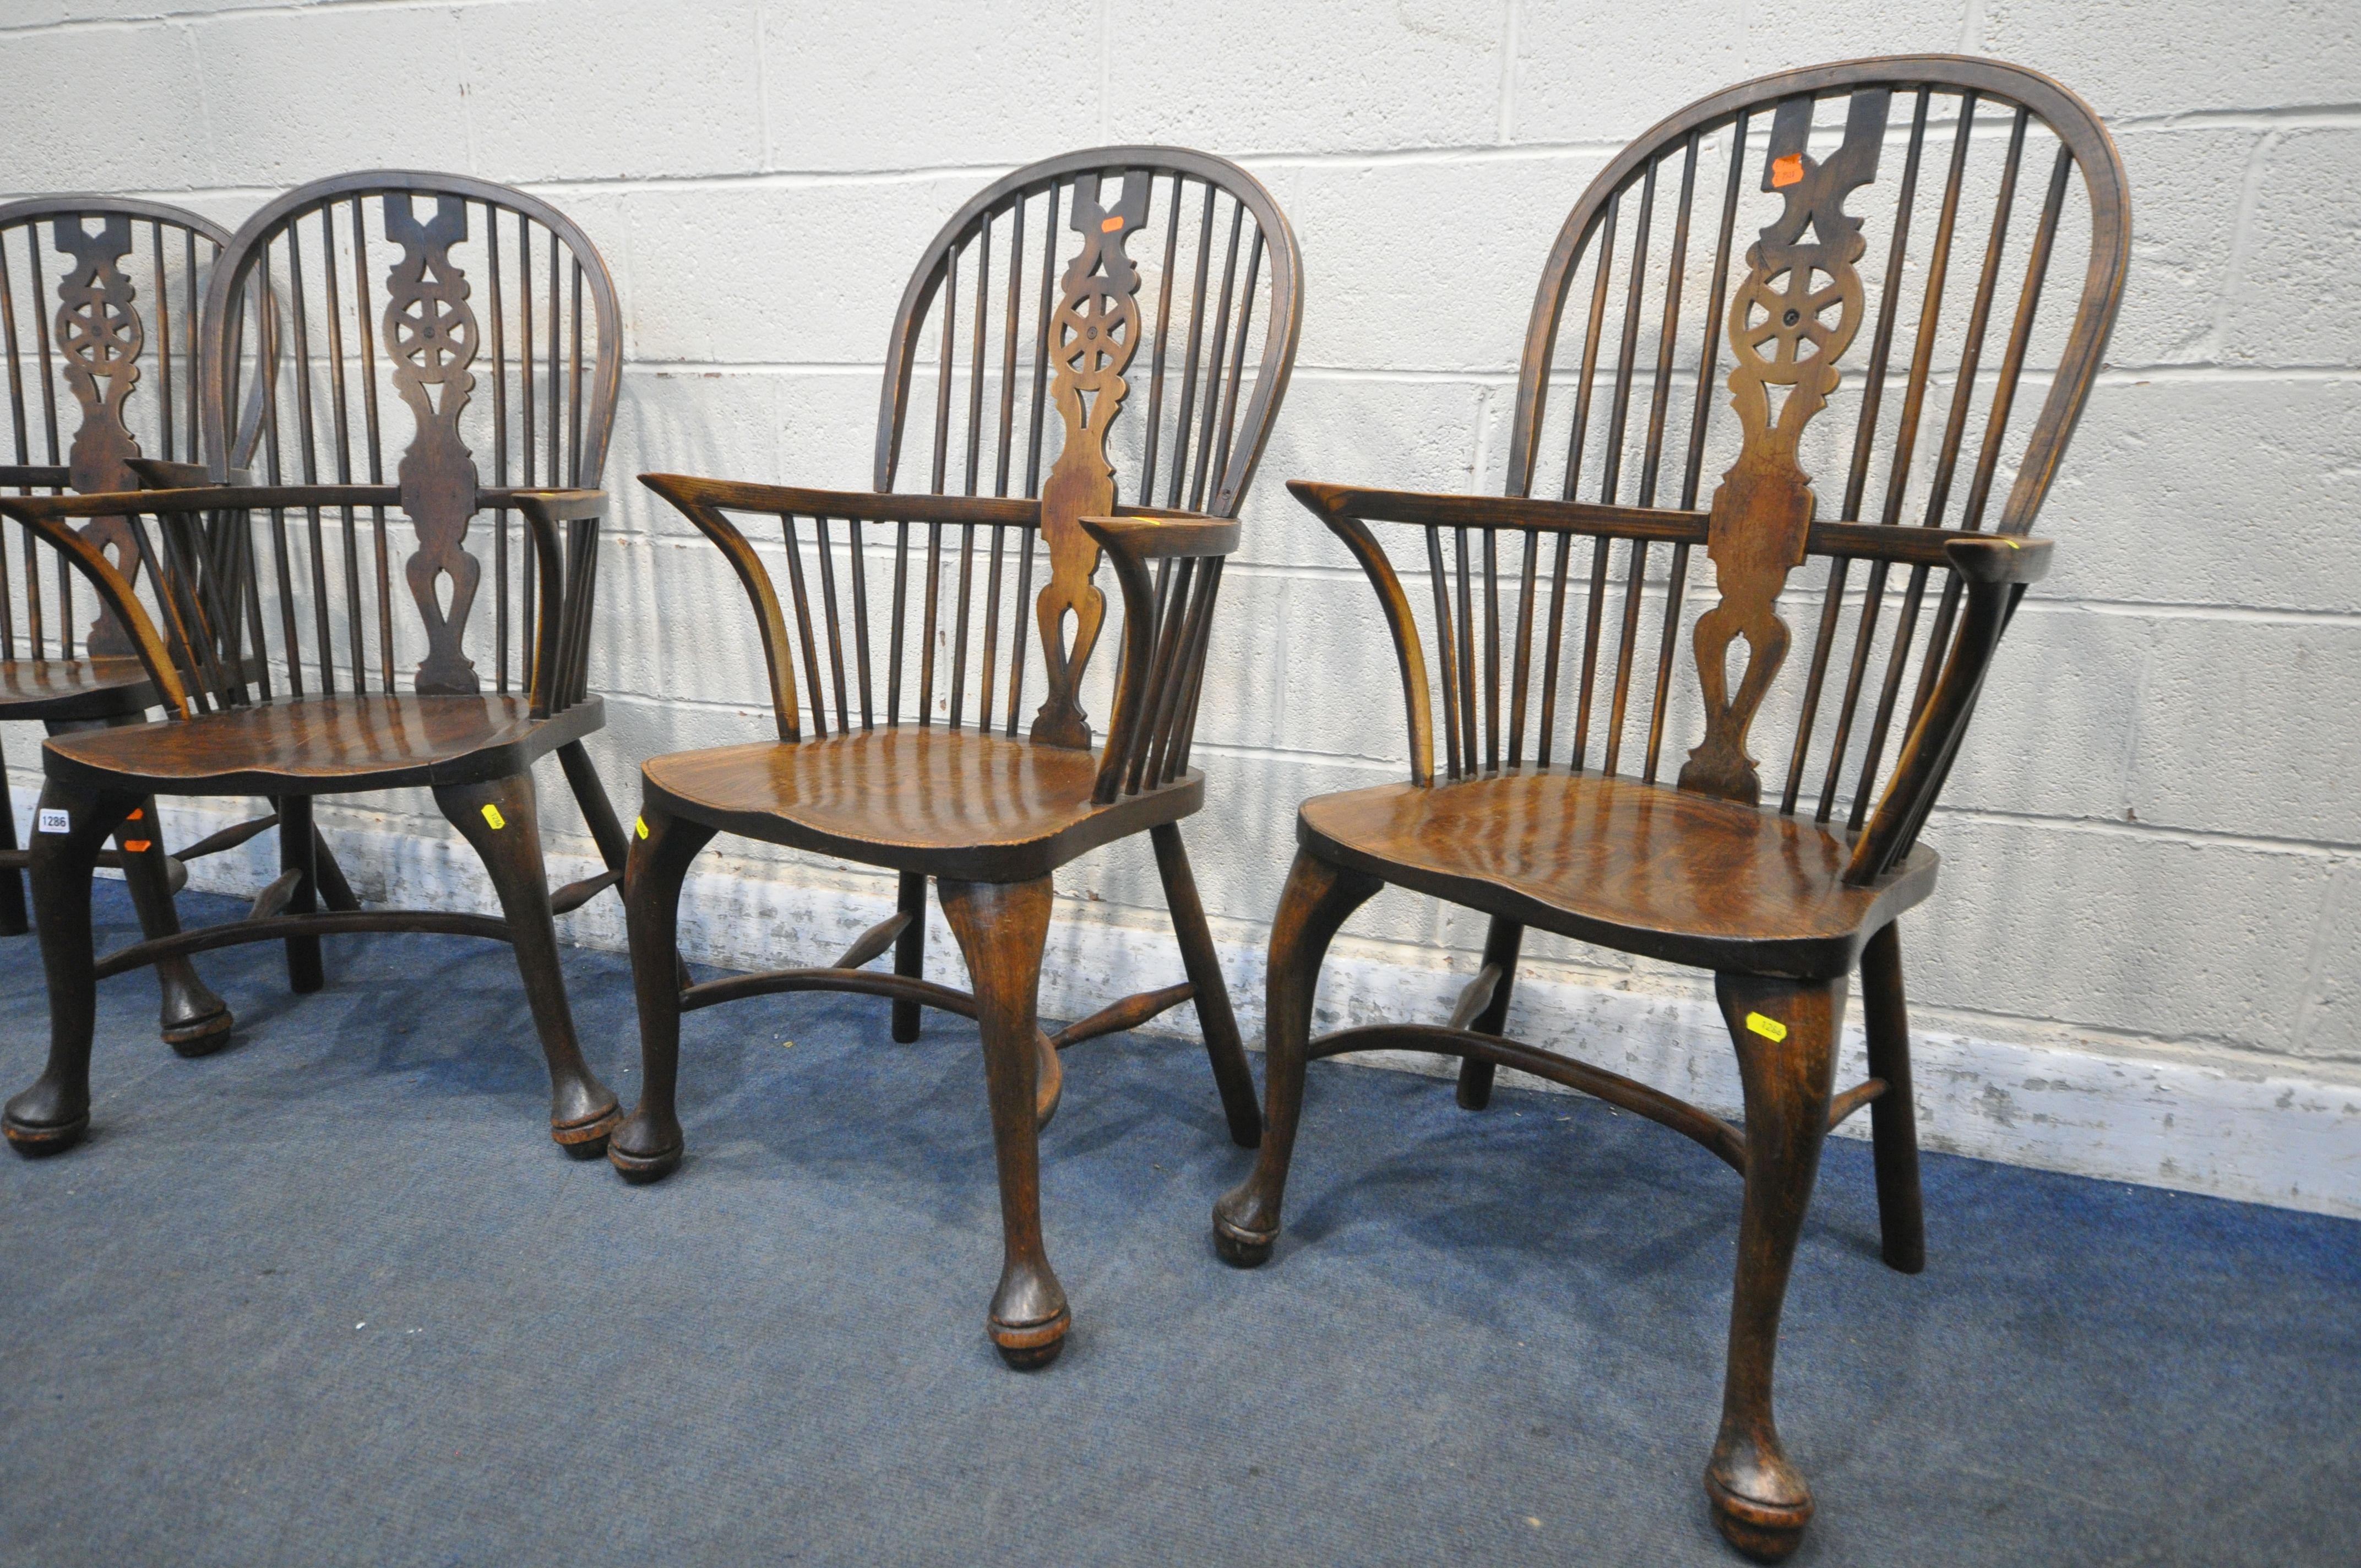 A SET OF FOUR EARLY 20TH CENTURY ELM AND BEECH HOOP BACK WINDSOR ARMCHAIR, with a wheel splat - Image 5 of 7